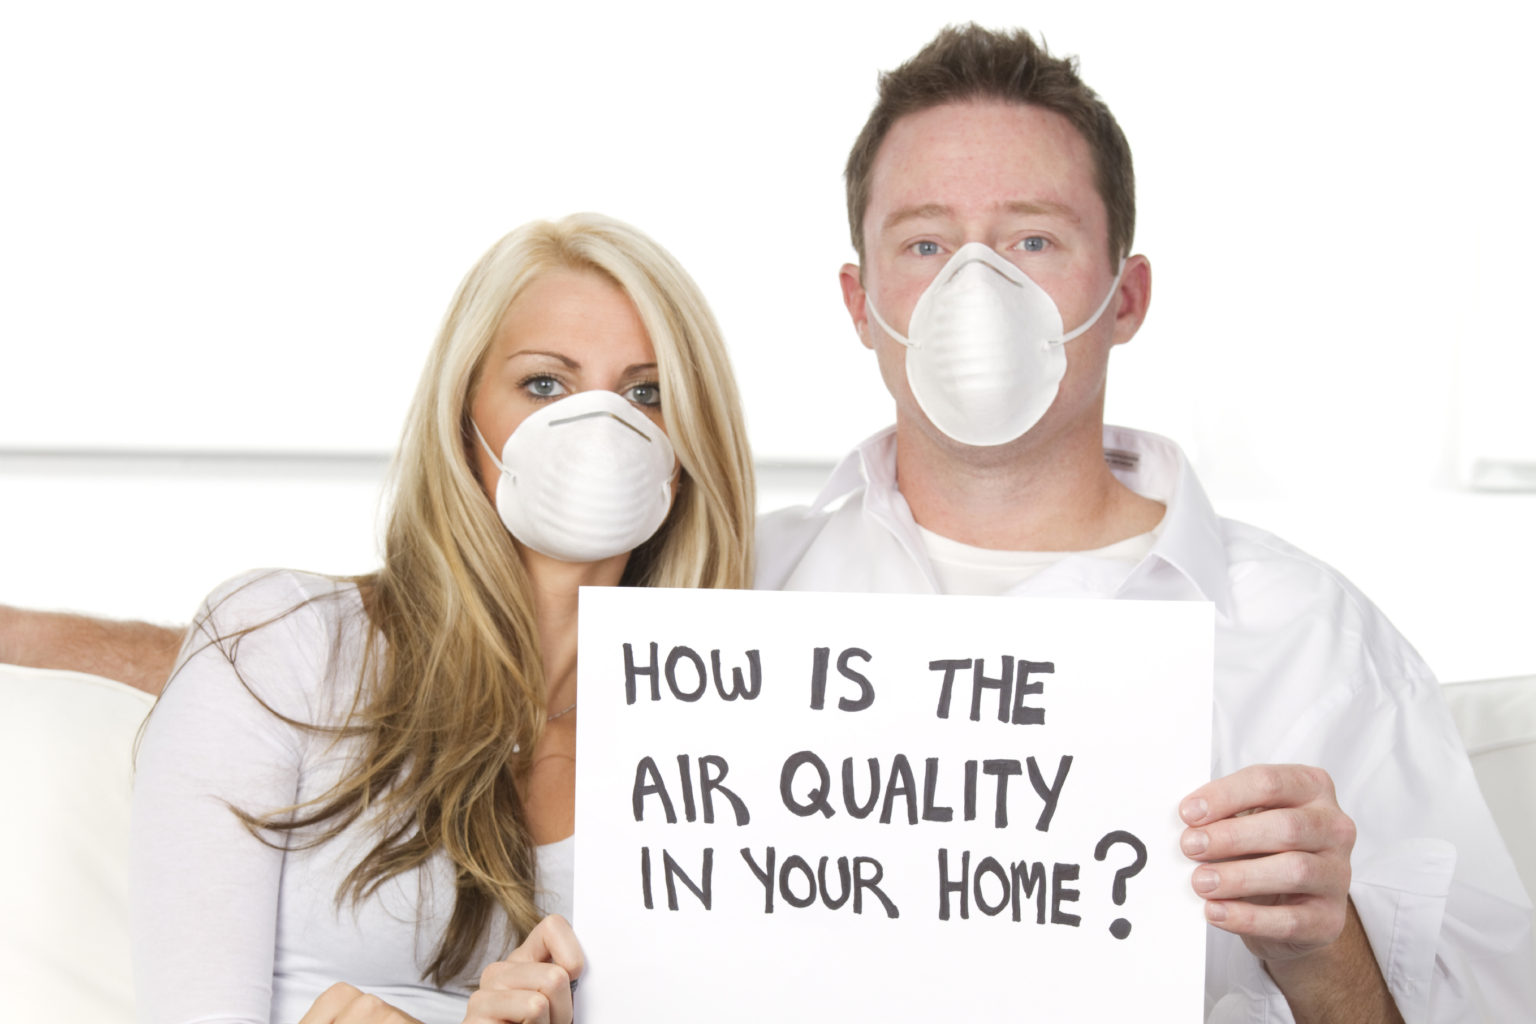 a couple wearing mask with banner in their hands, "how is the air quality in your home" is written on the banner.